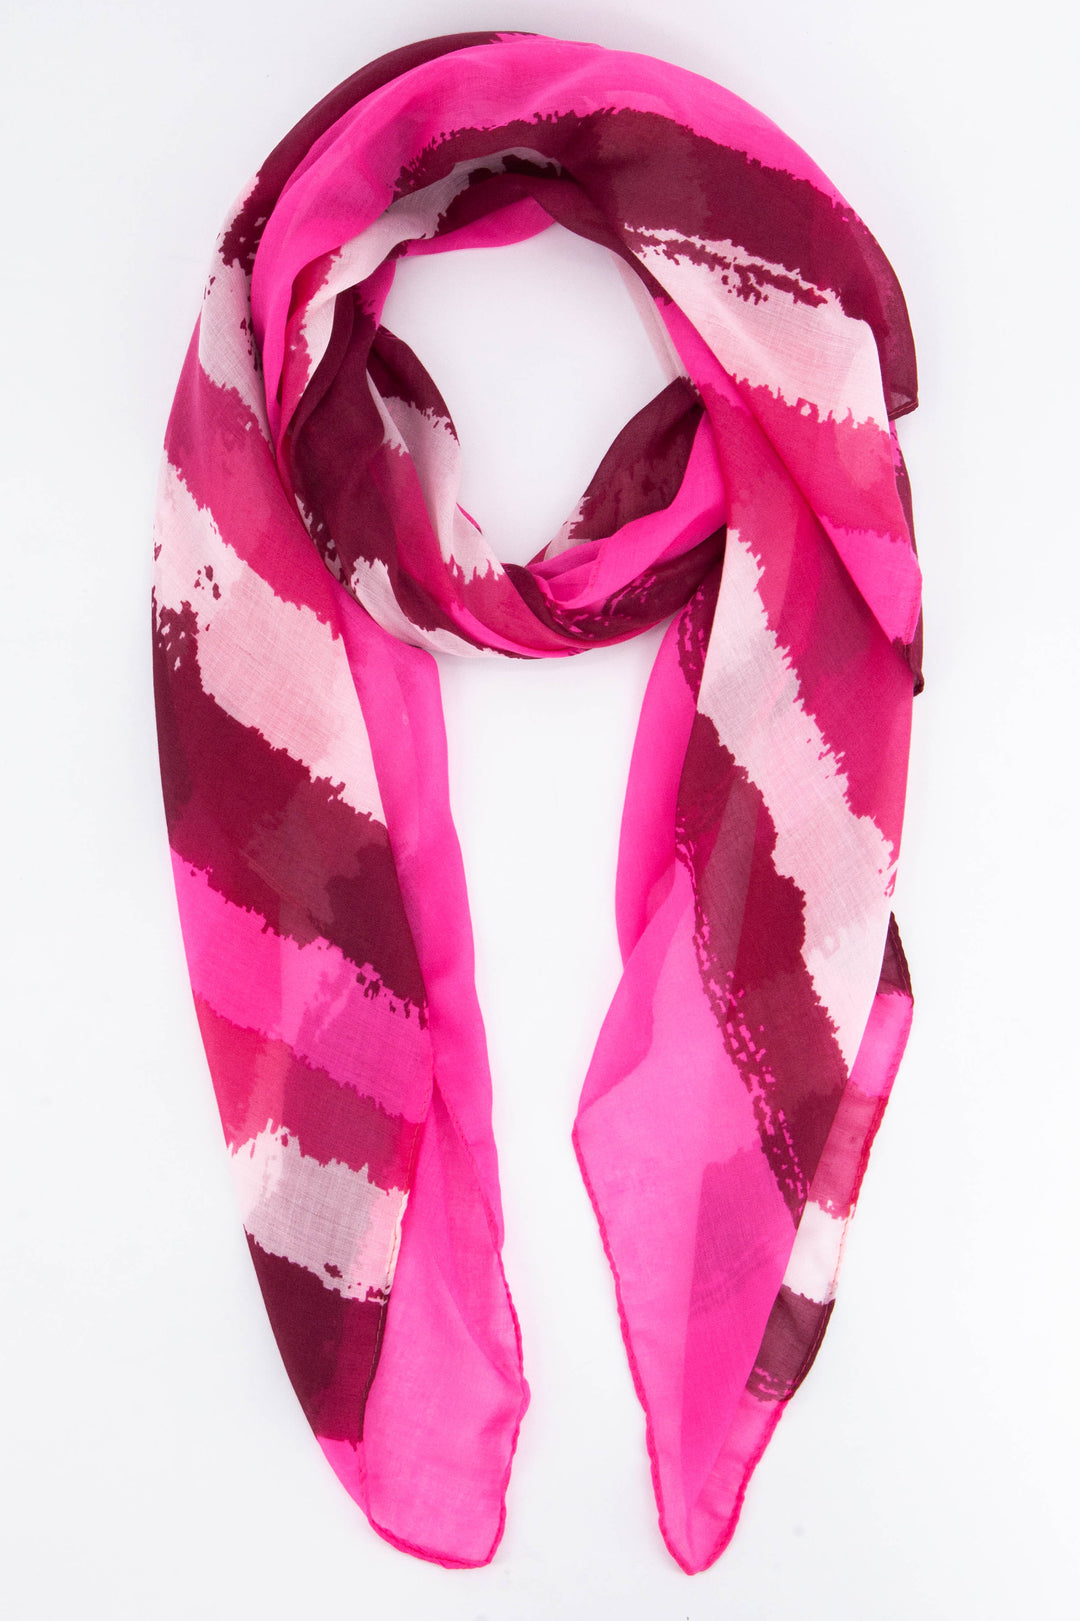 Painted Brushstroke Style Stripe Print Scarf in Hot Pink